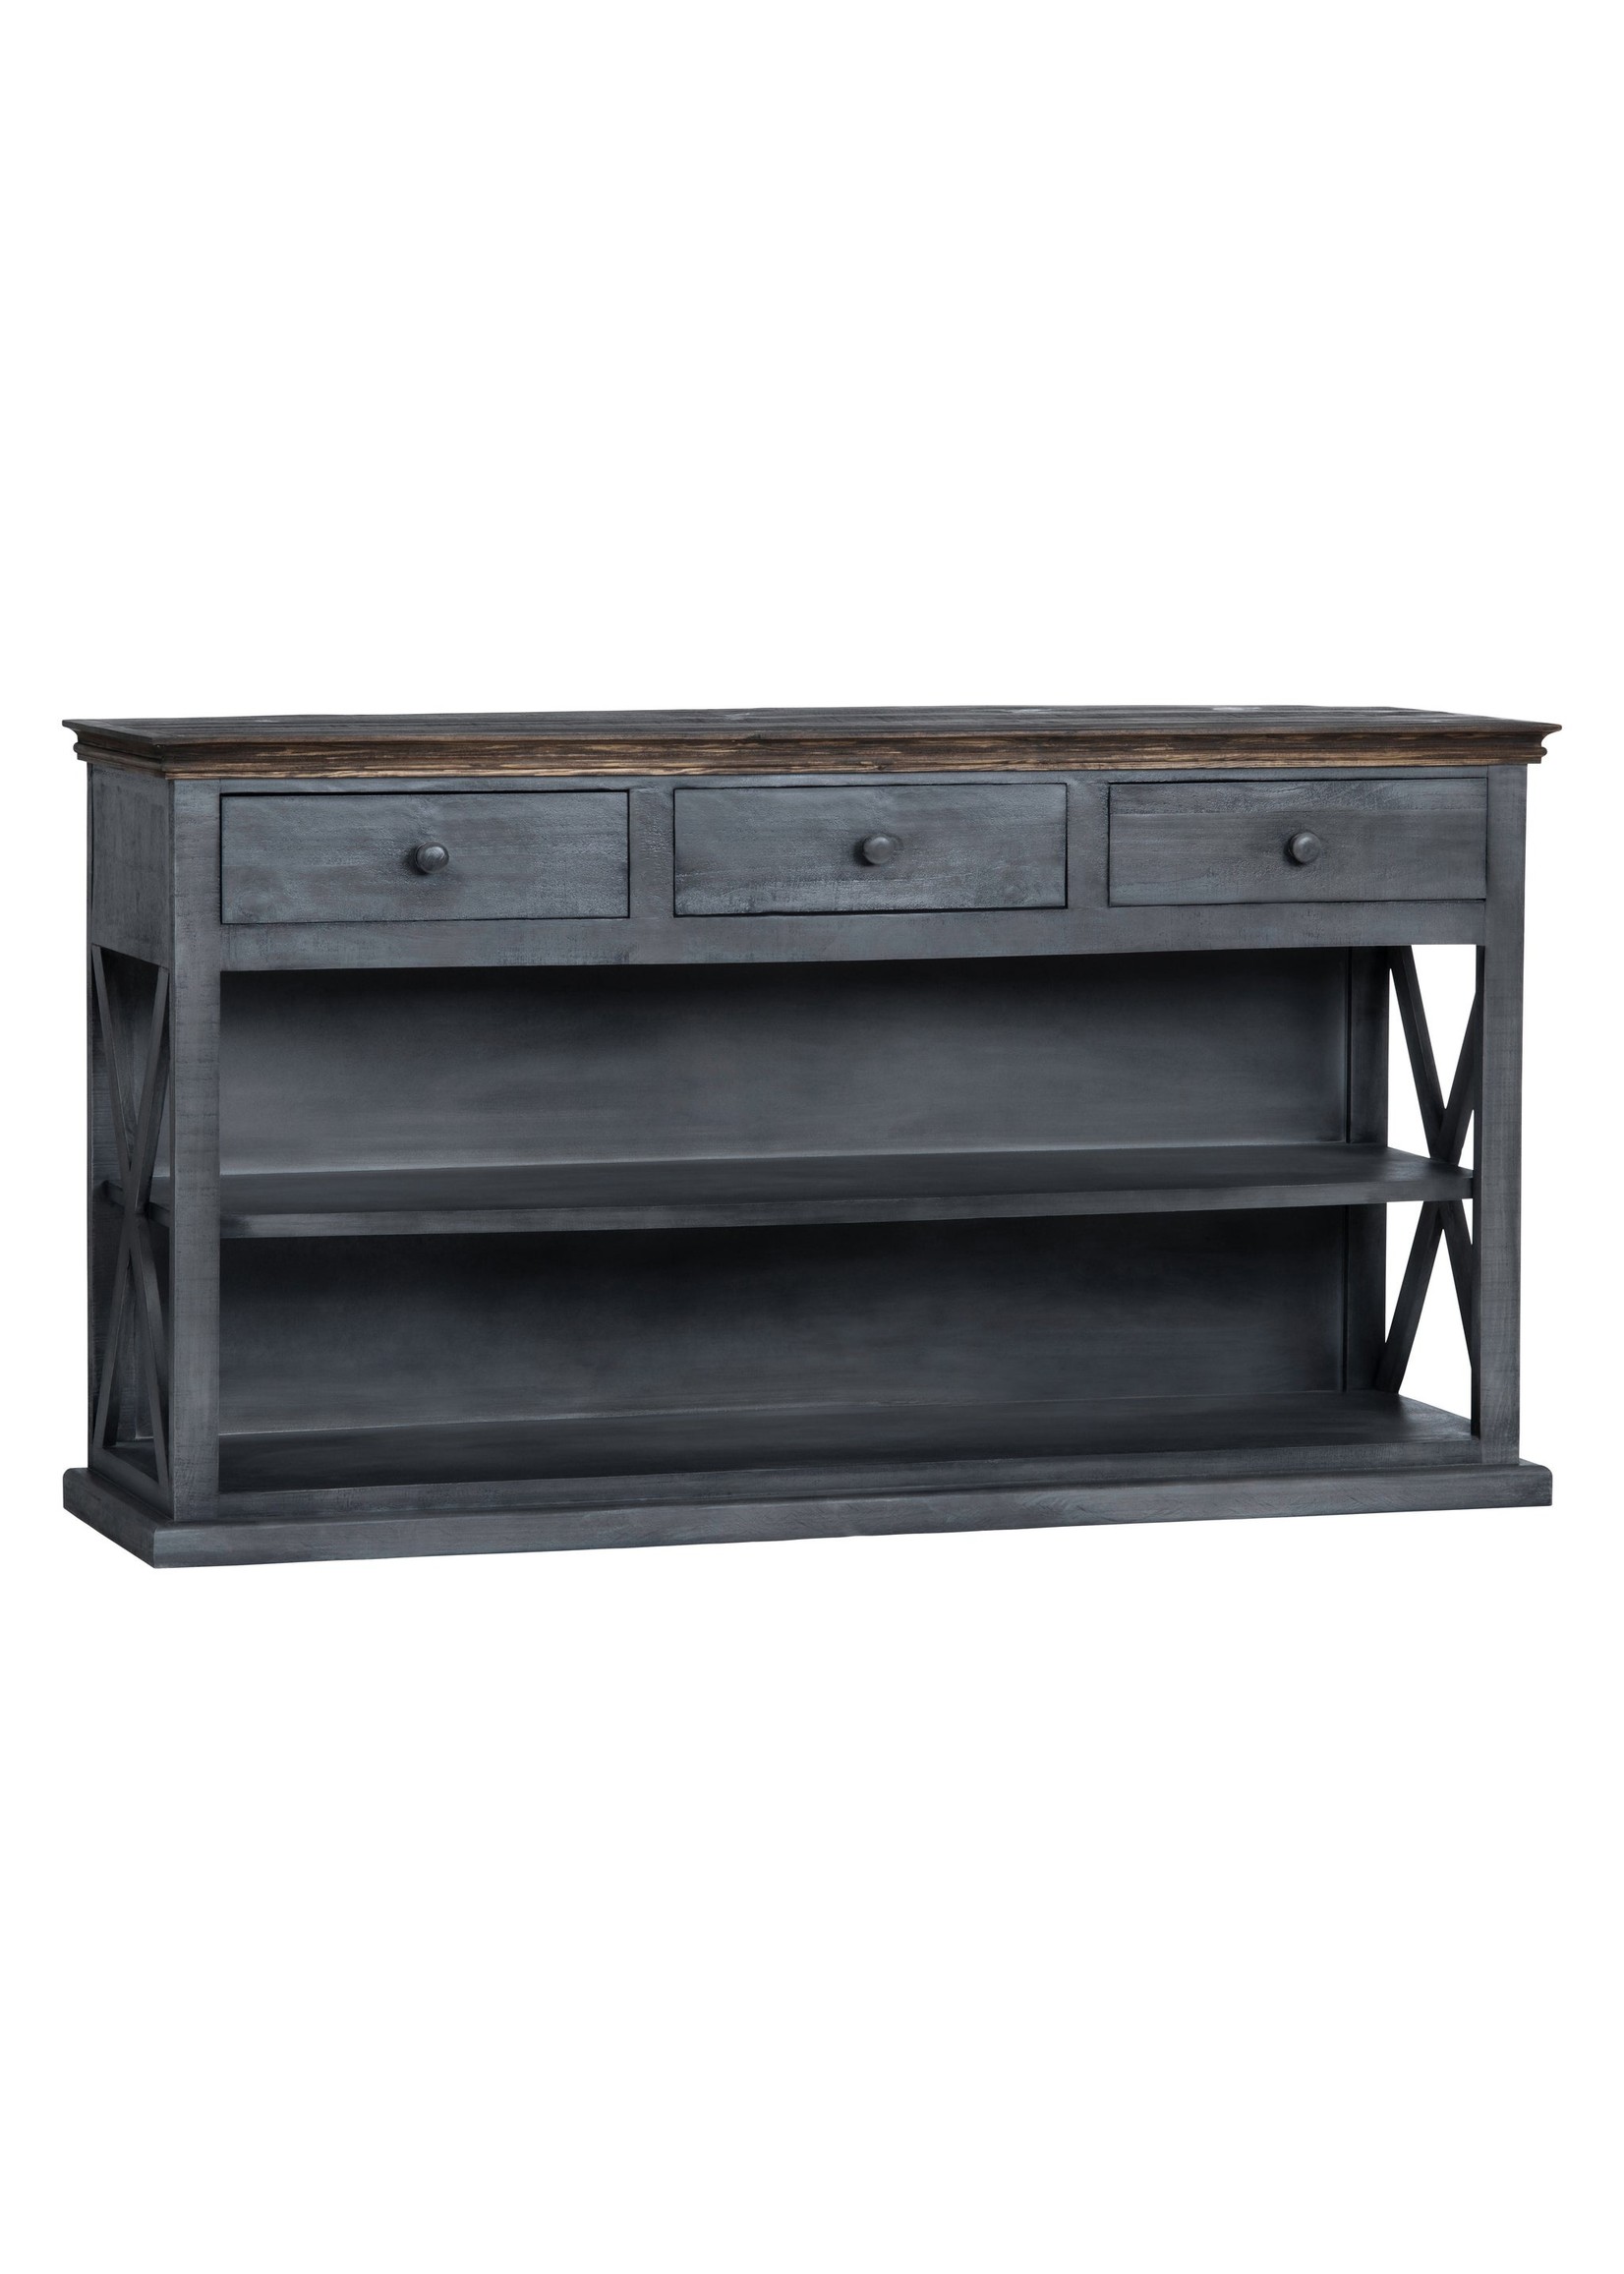 Crestview Open Console W/ 3 Drawers